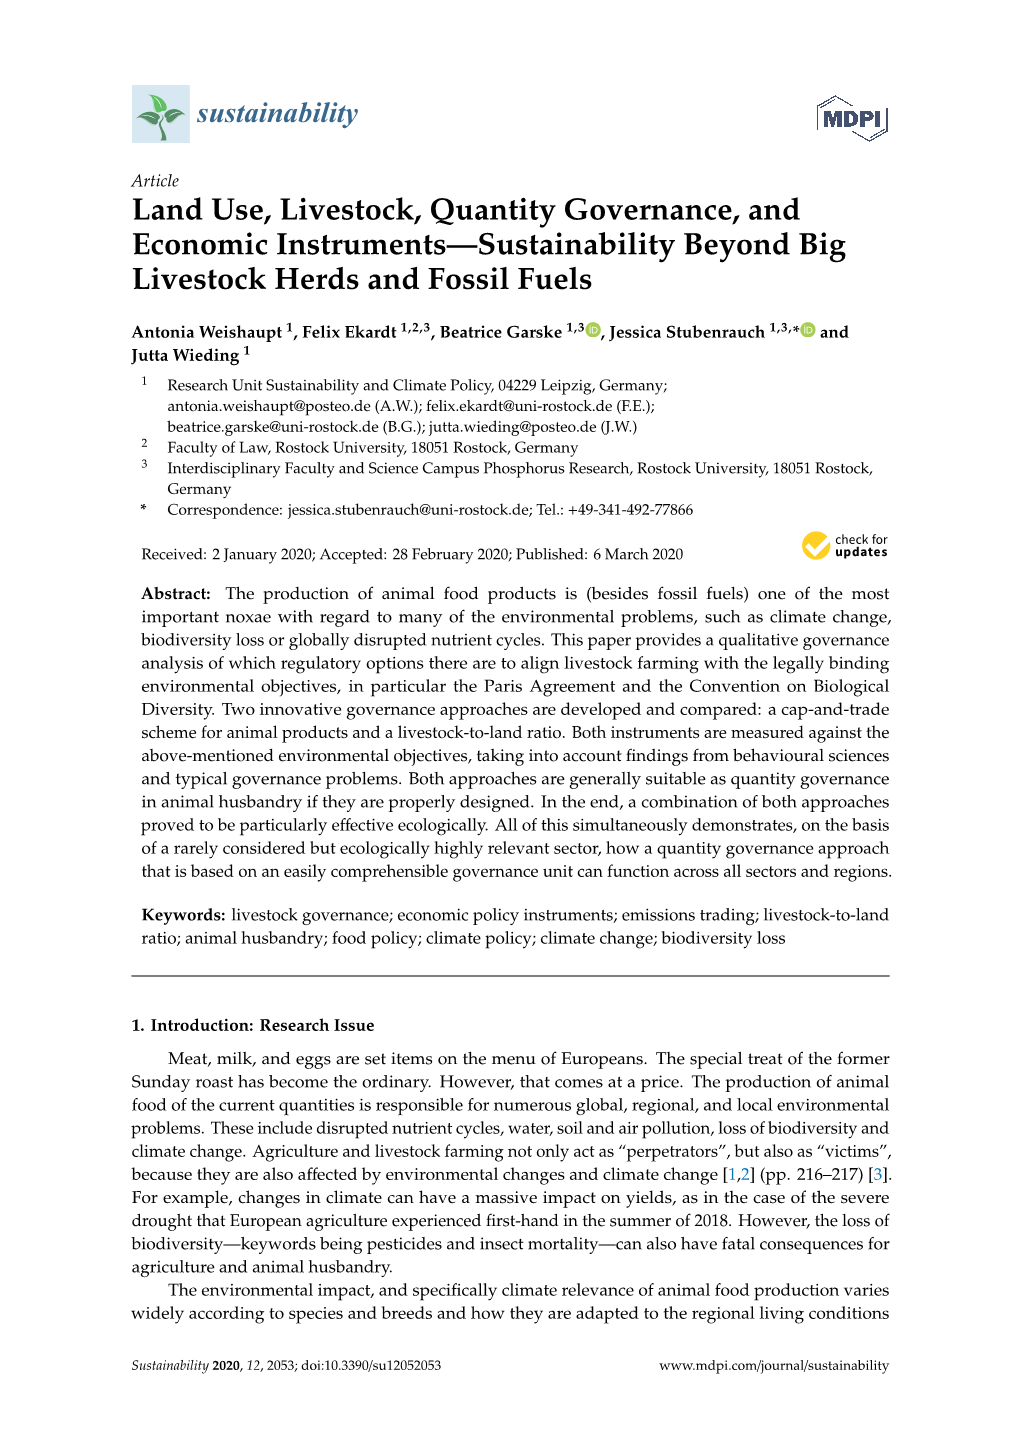 Land Use, Livestock, Quantity Governance, and Economic Instruments—Sustainability Beyond Big Livestock Herds and Fossil Fuels